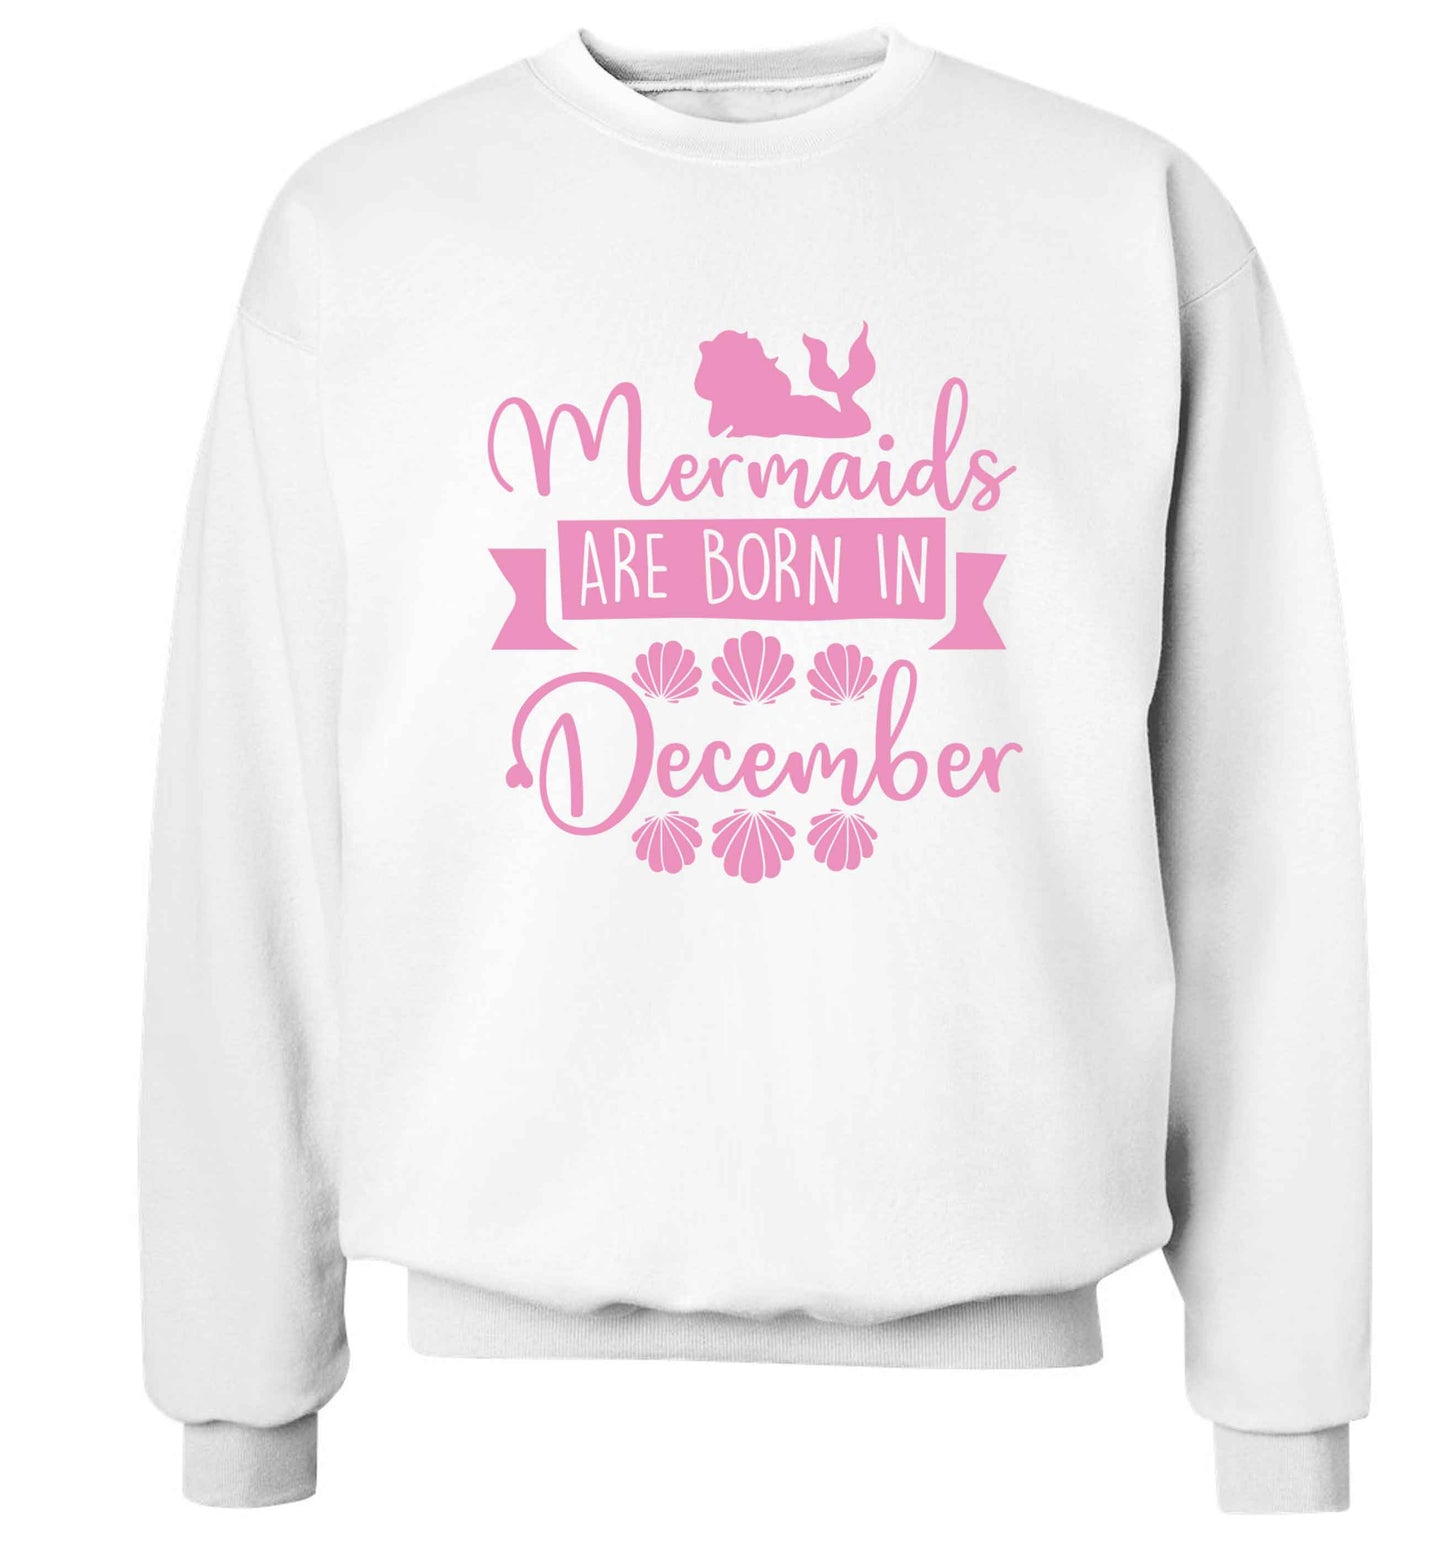 Mermaids are born in December Adult's unisex white Sweater 2XL